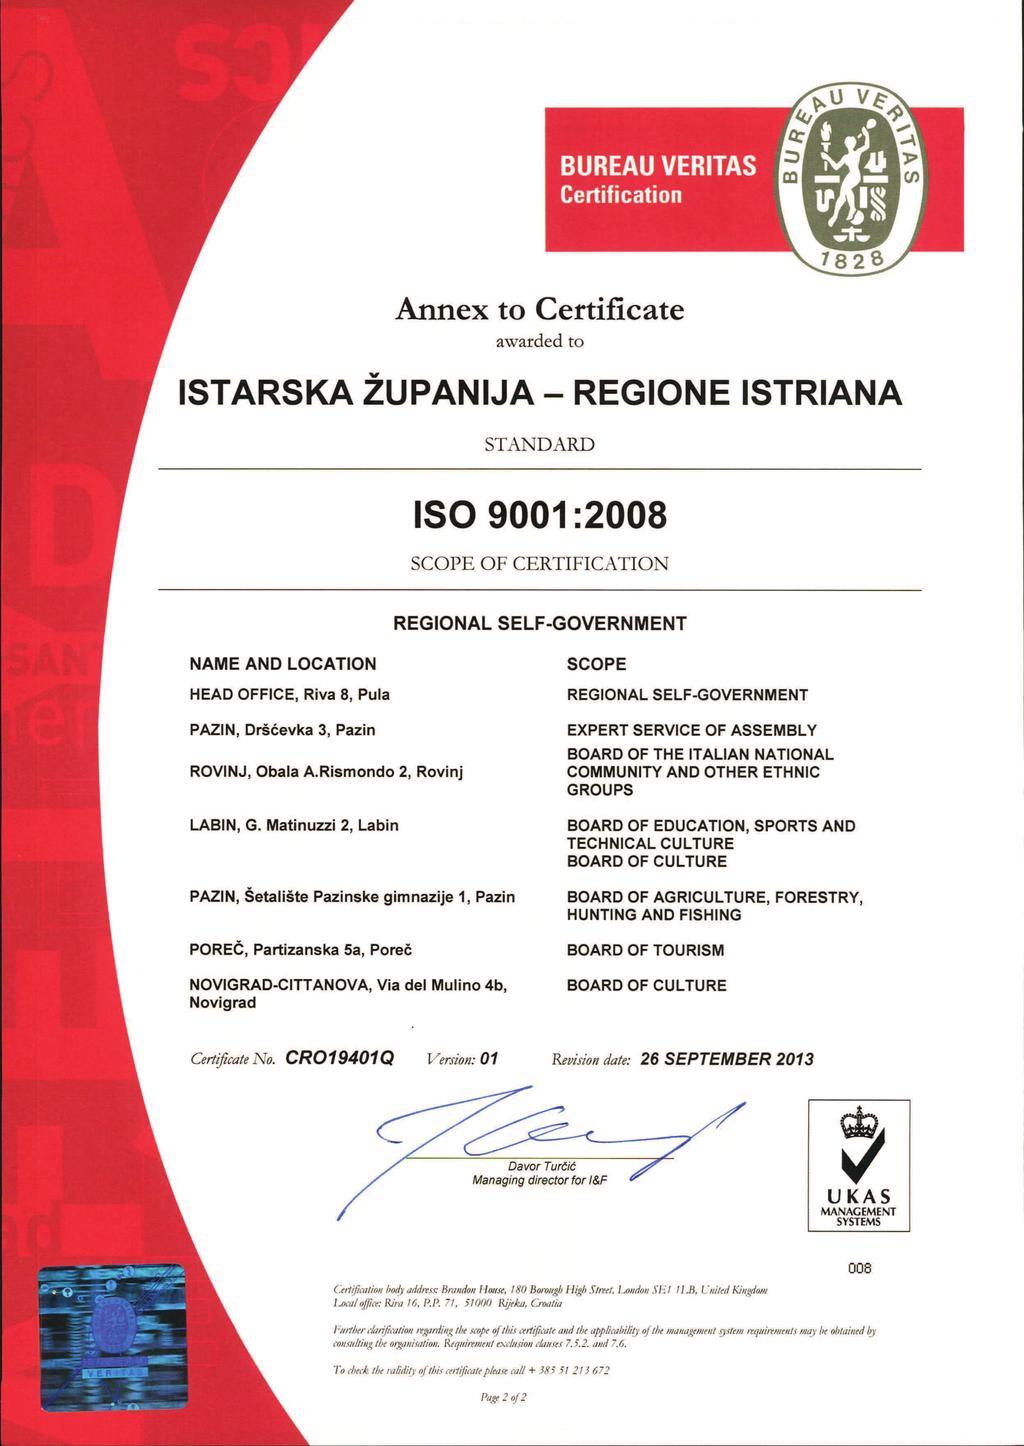 Annex to Certificate awarded to STANDARD SCOPE OF CERTIFICATION REGIONAL SELF-GOVERNMENT NAME AND LOCATION SCOPE HEAD OFFICE, Riva 8, Pula REGIONAL PAZIN, Dršćevka EXPERT SERVICE OF ASSEMBLY 3, Pazin